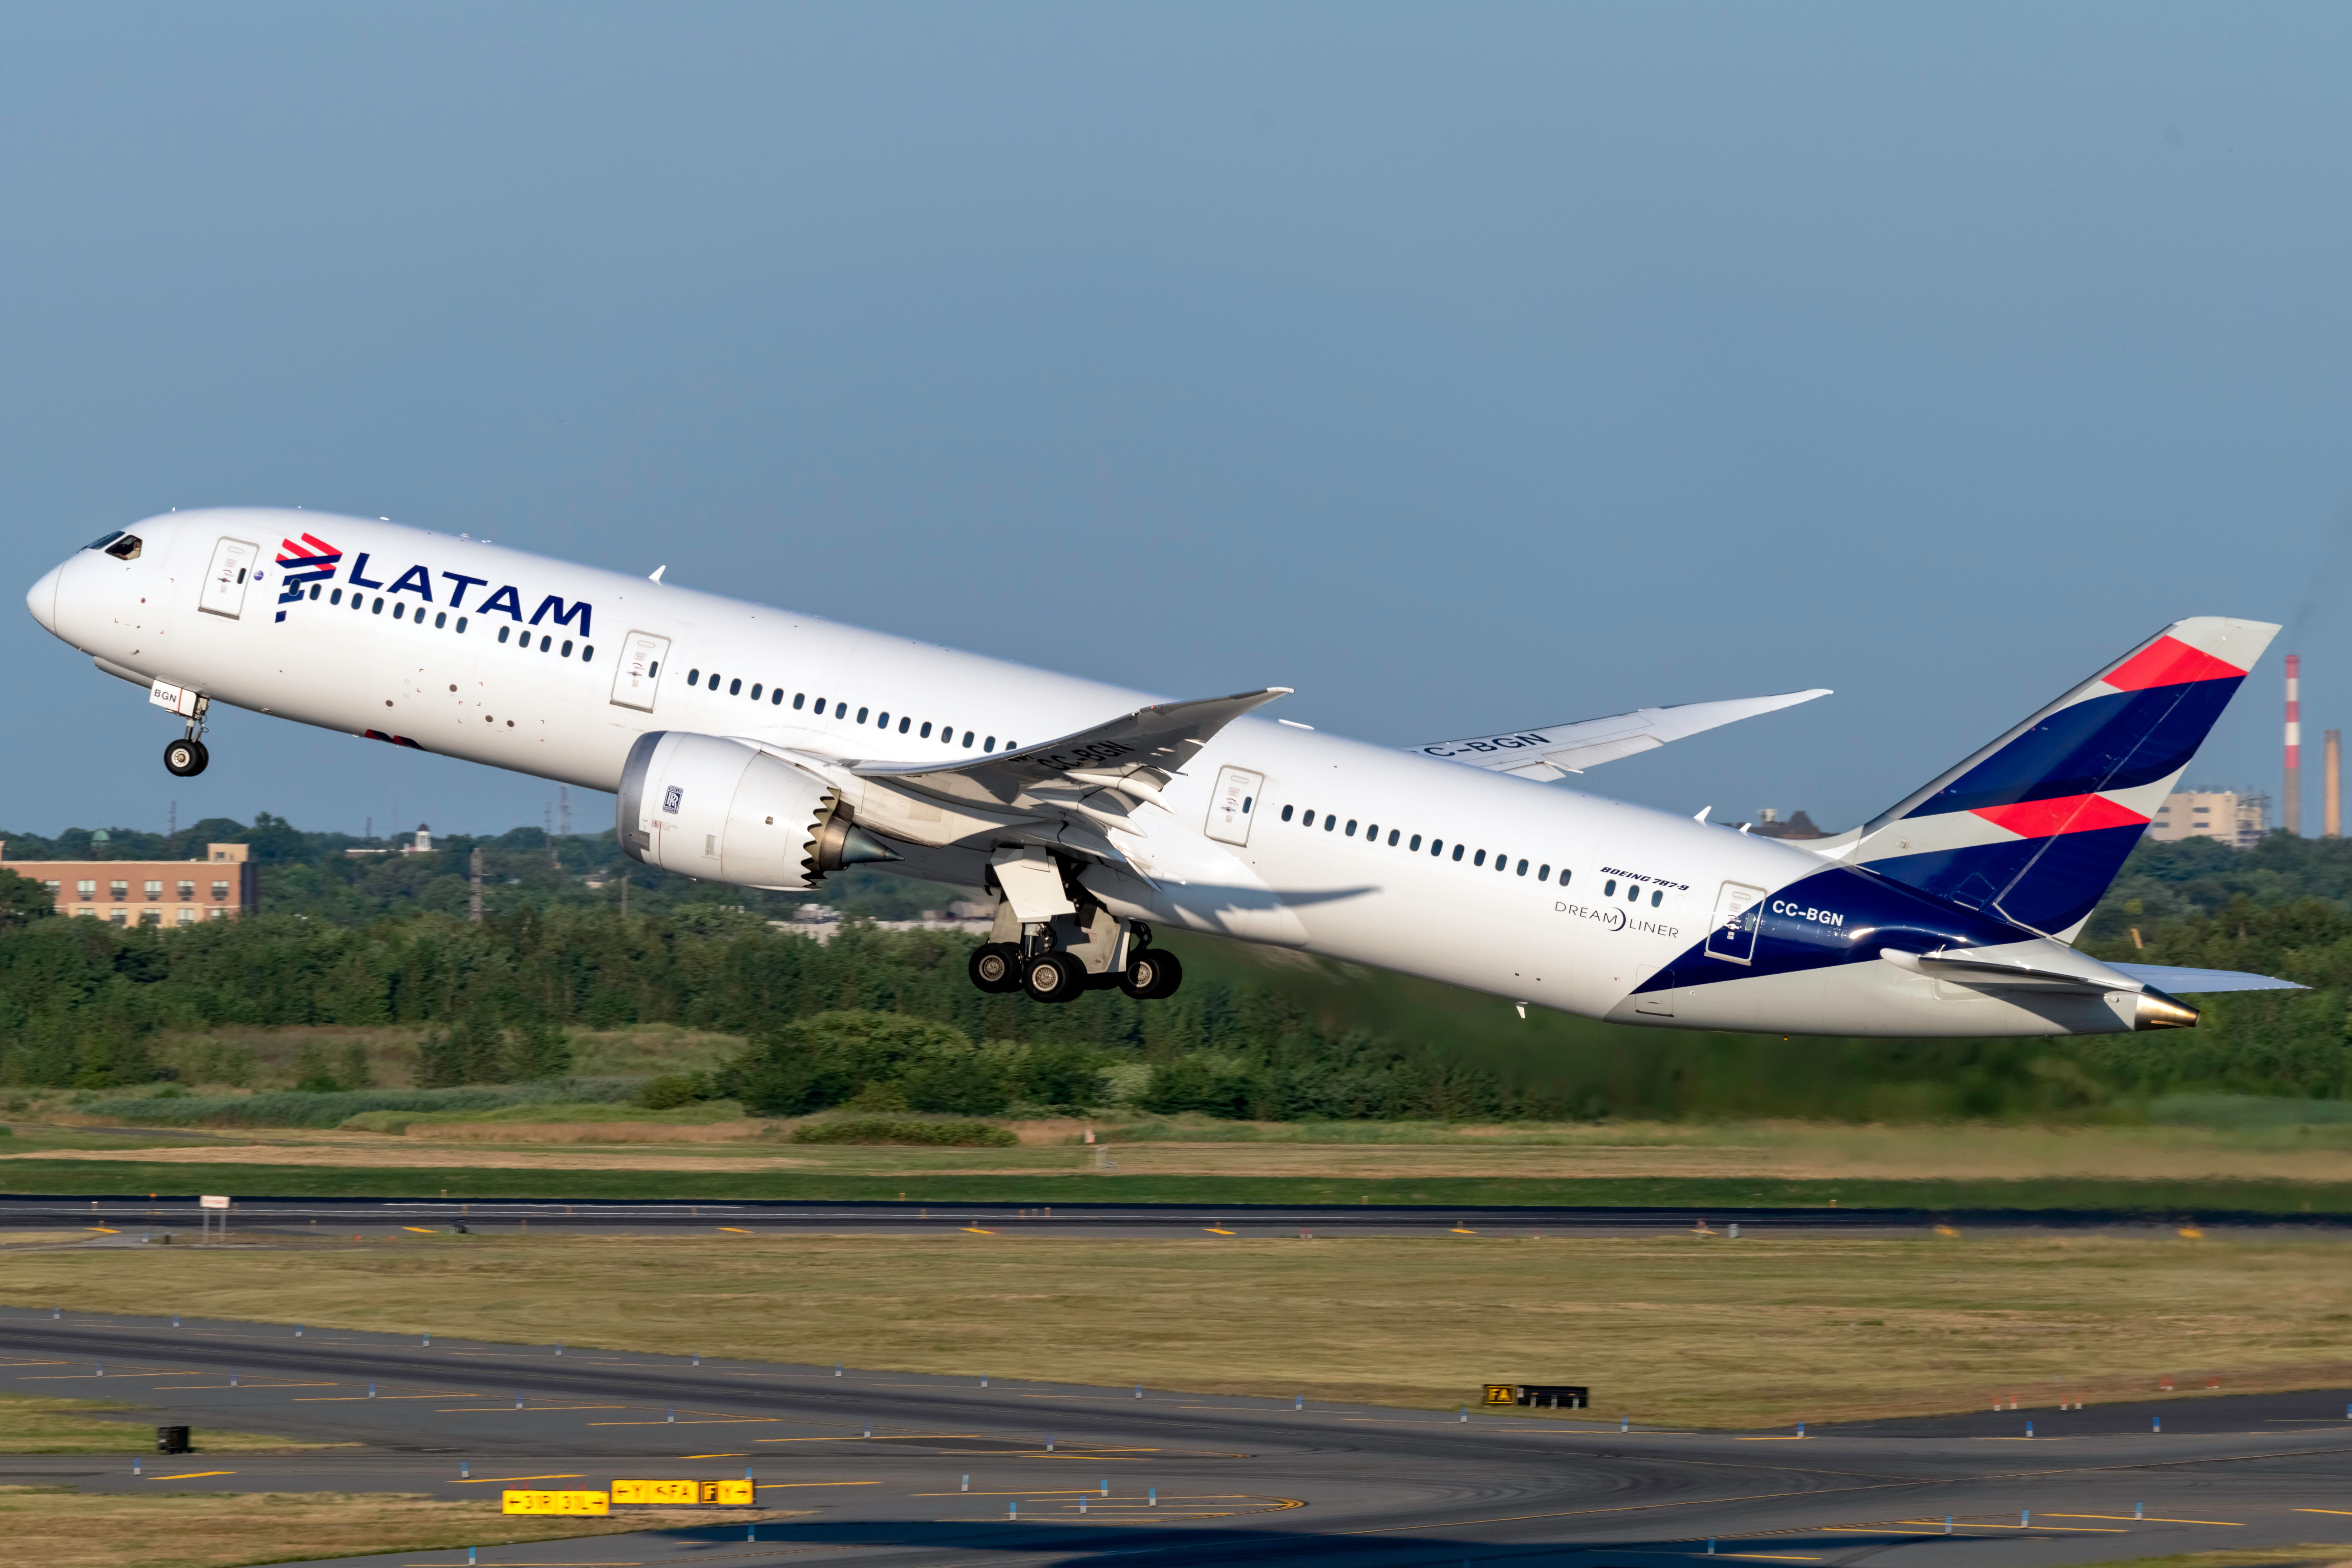 A LATAM Airlines Boeing 787-9